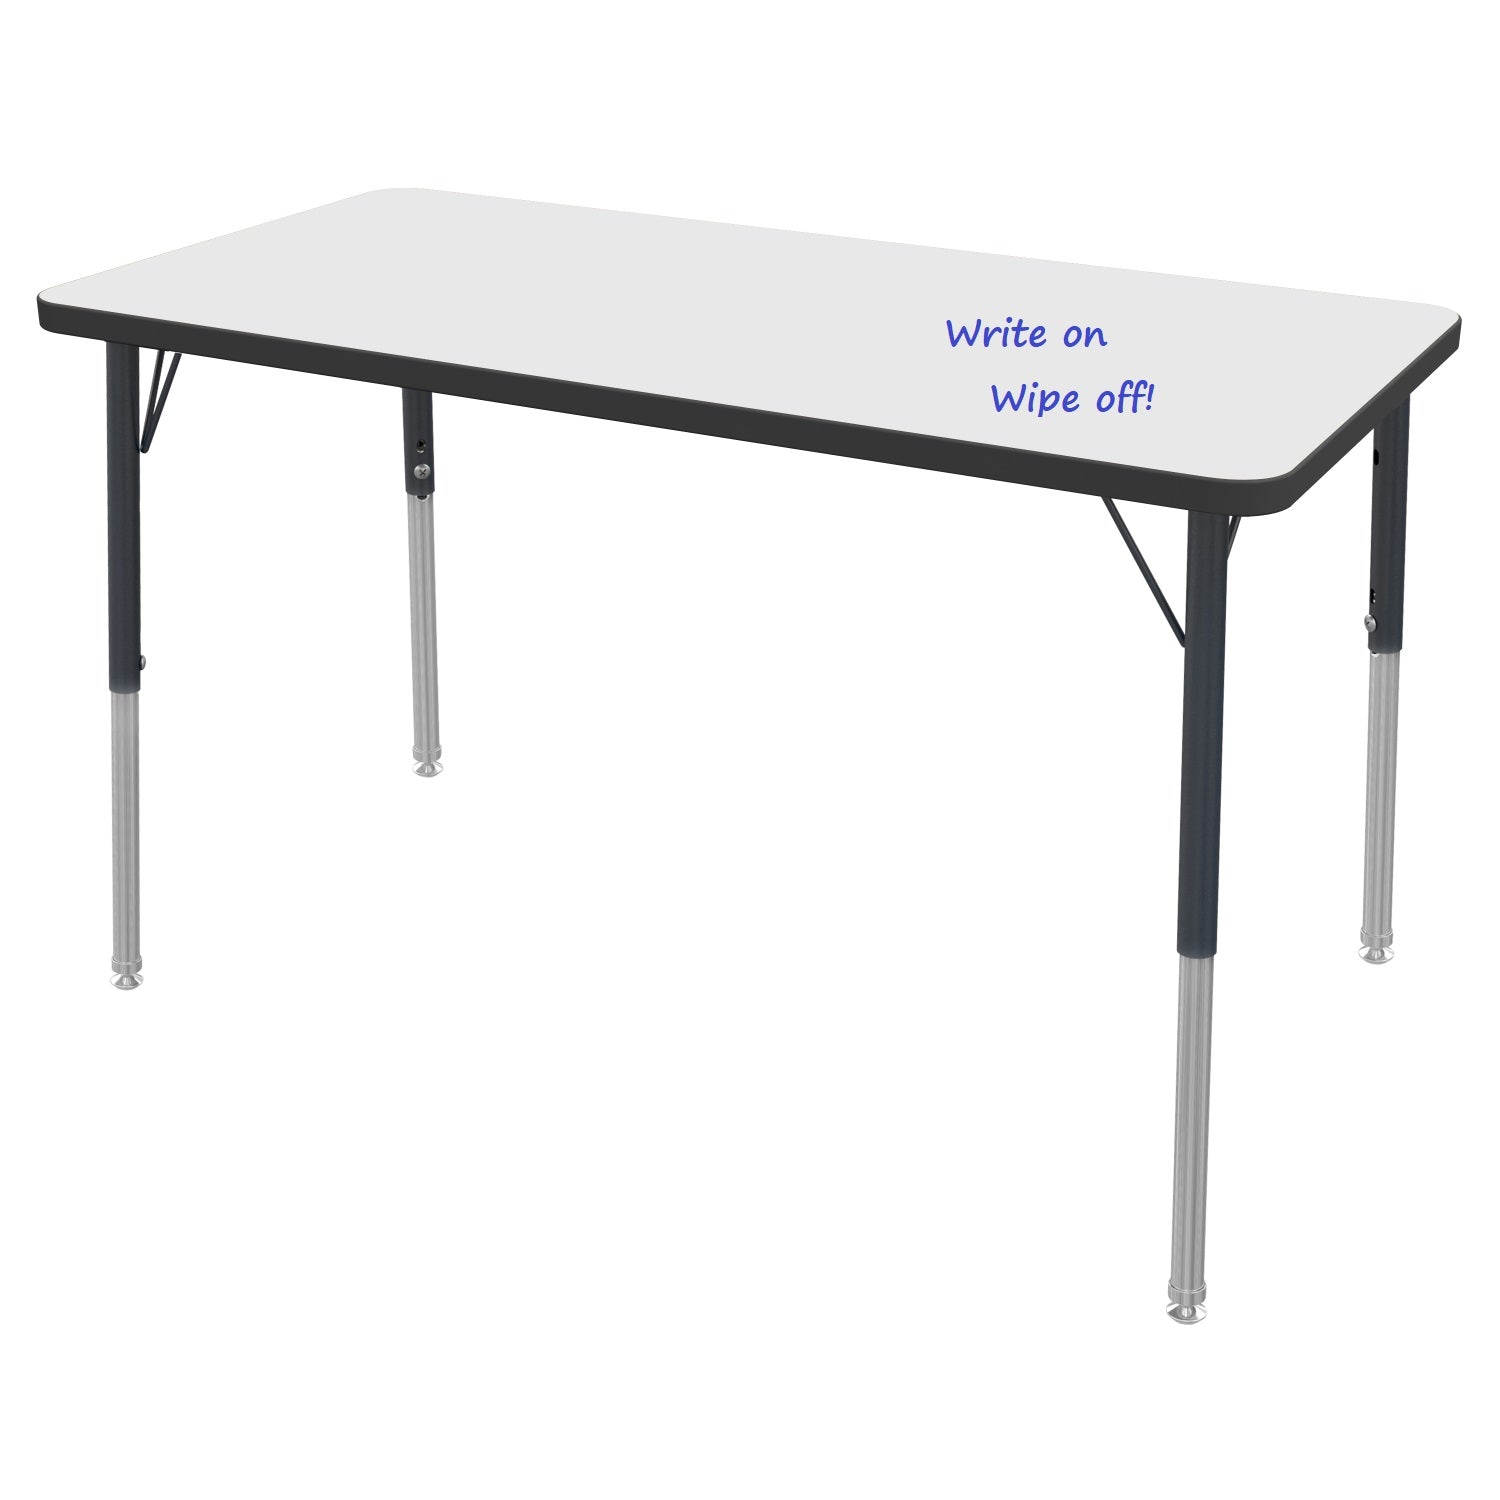 MG Series Adjustable Height Activity Table with White Dry Erase Markerboard Top, 24"x 48" Rectangle